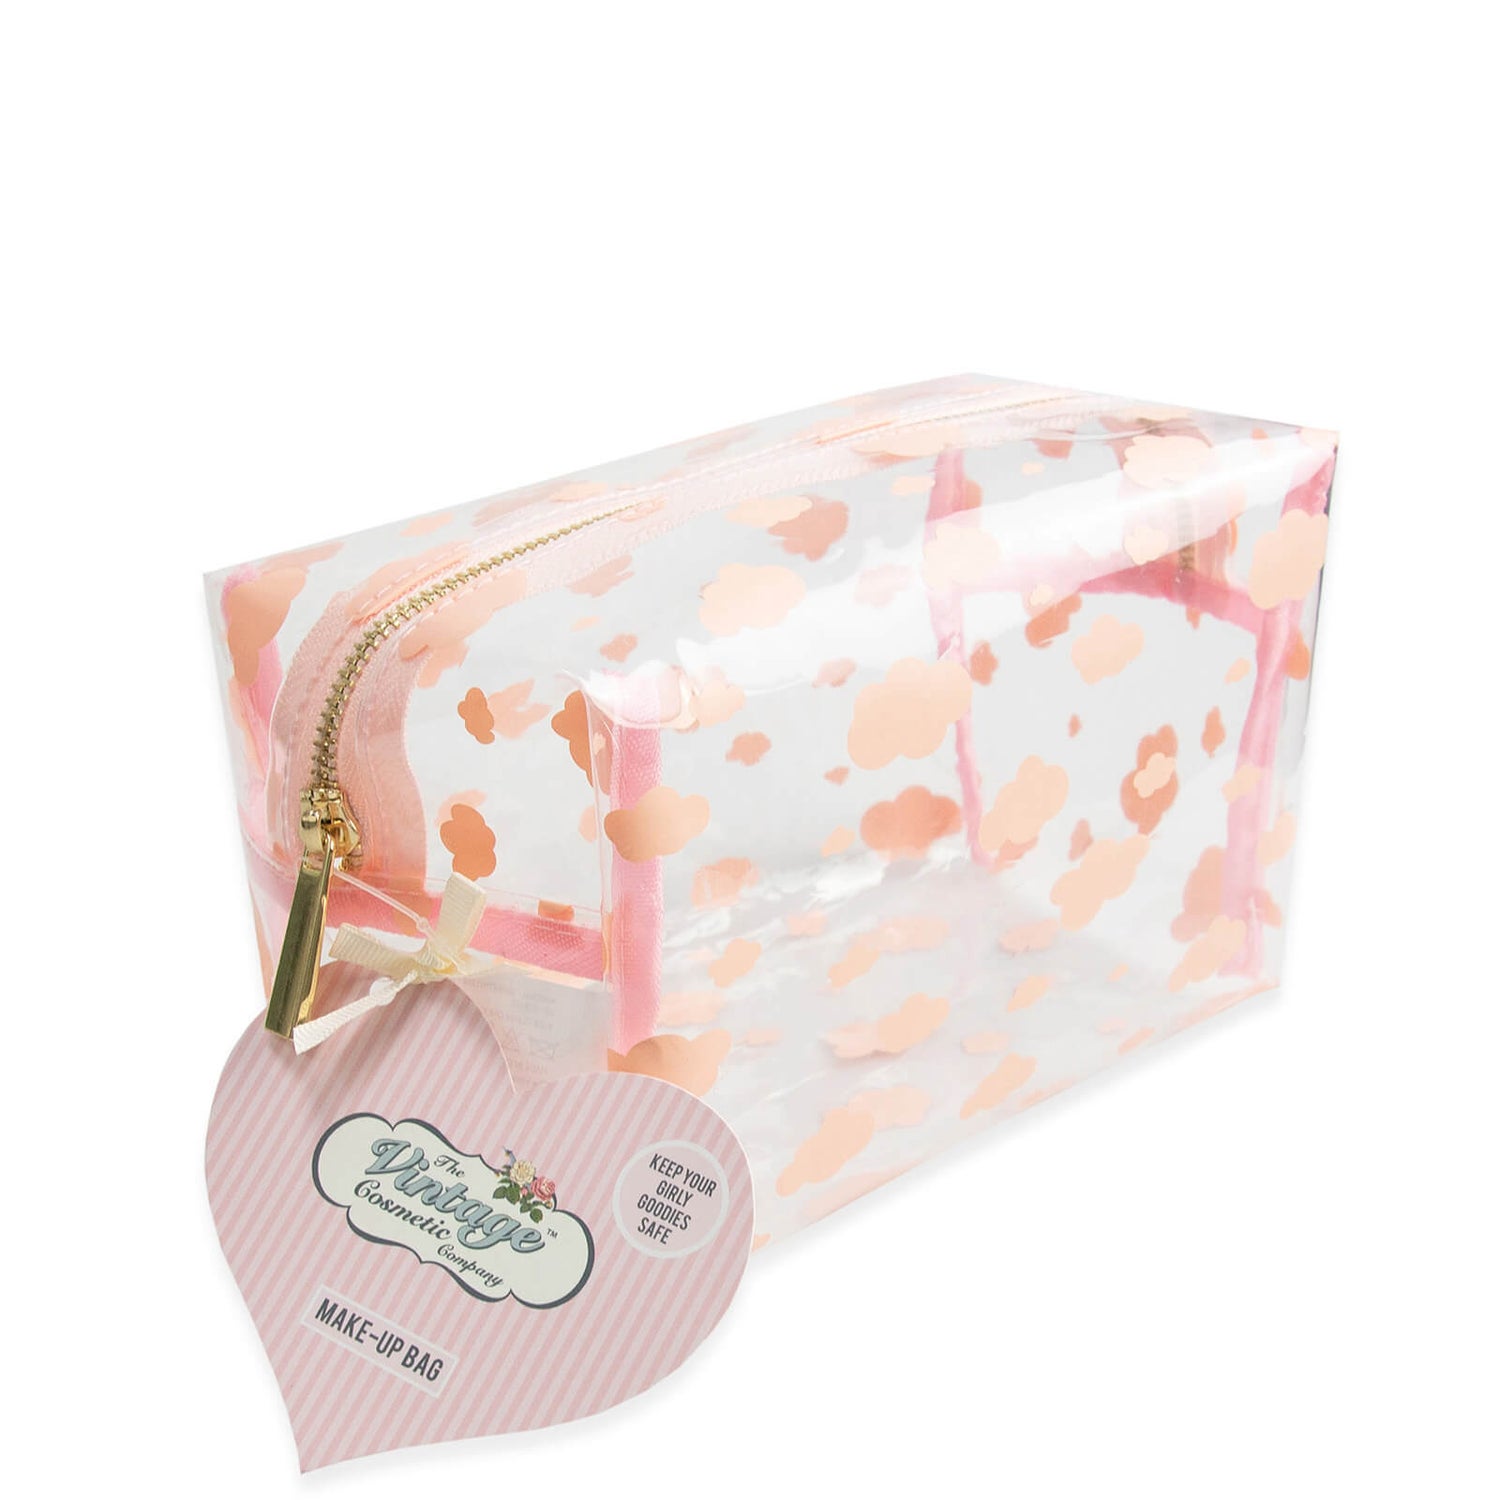 The Vintage Cosmetic Company Make-up Bag - Pink Cloud